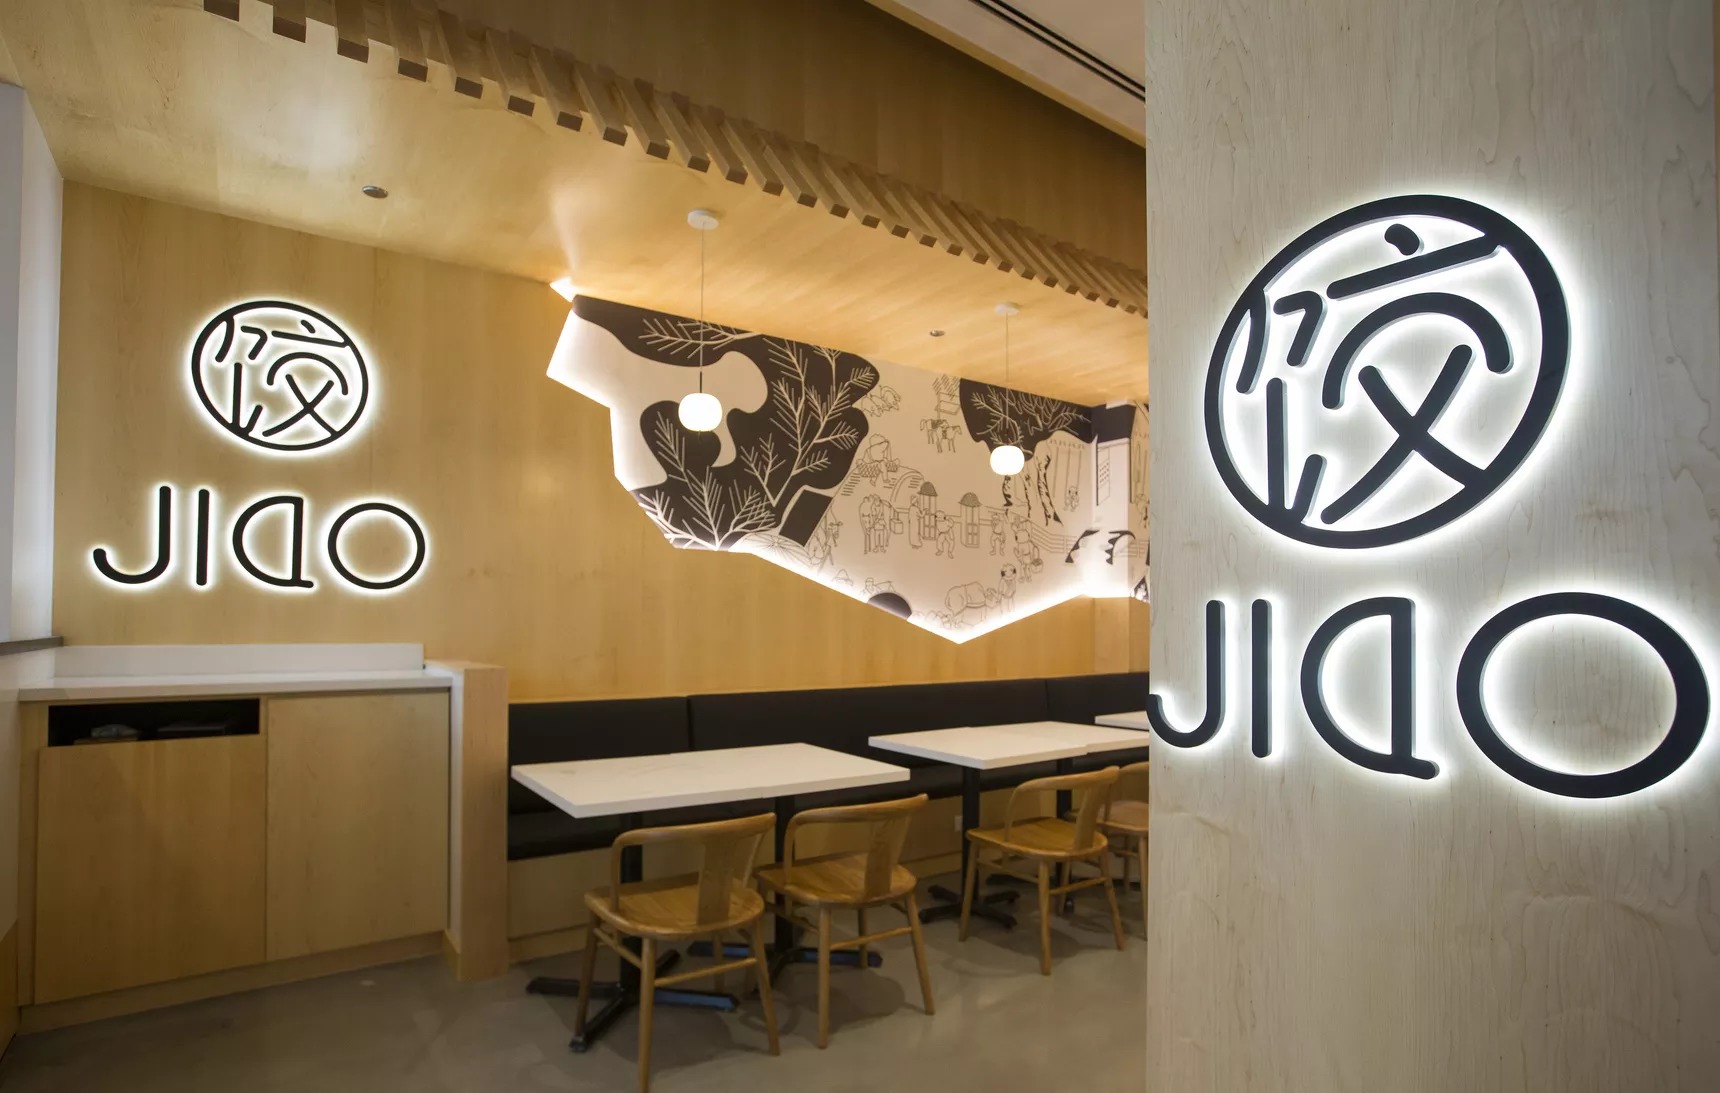 A dining room entrance with blond wood and large black signs that read “JIAO.”